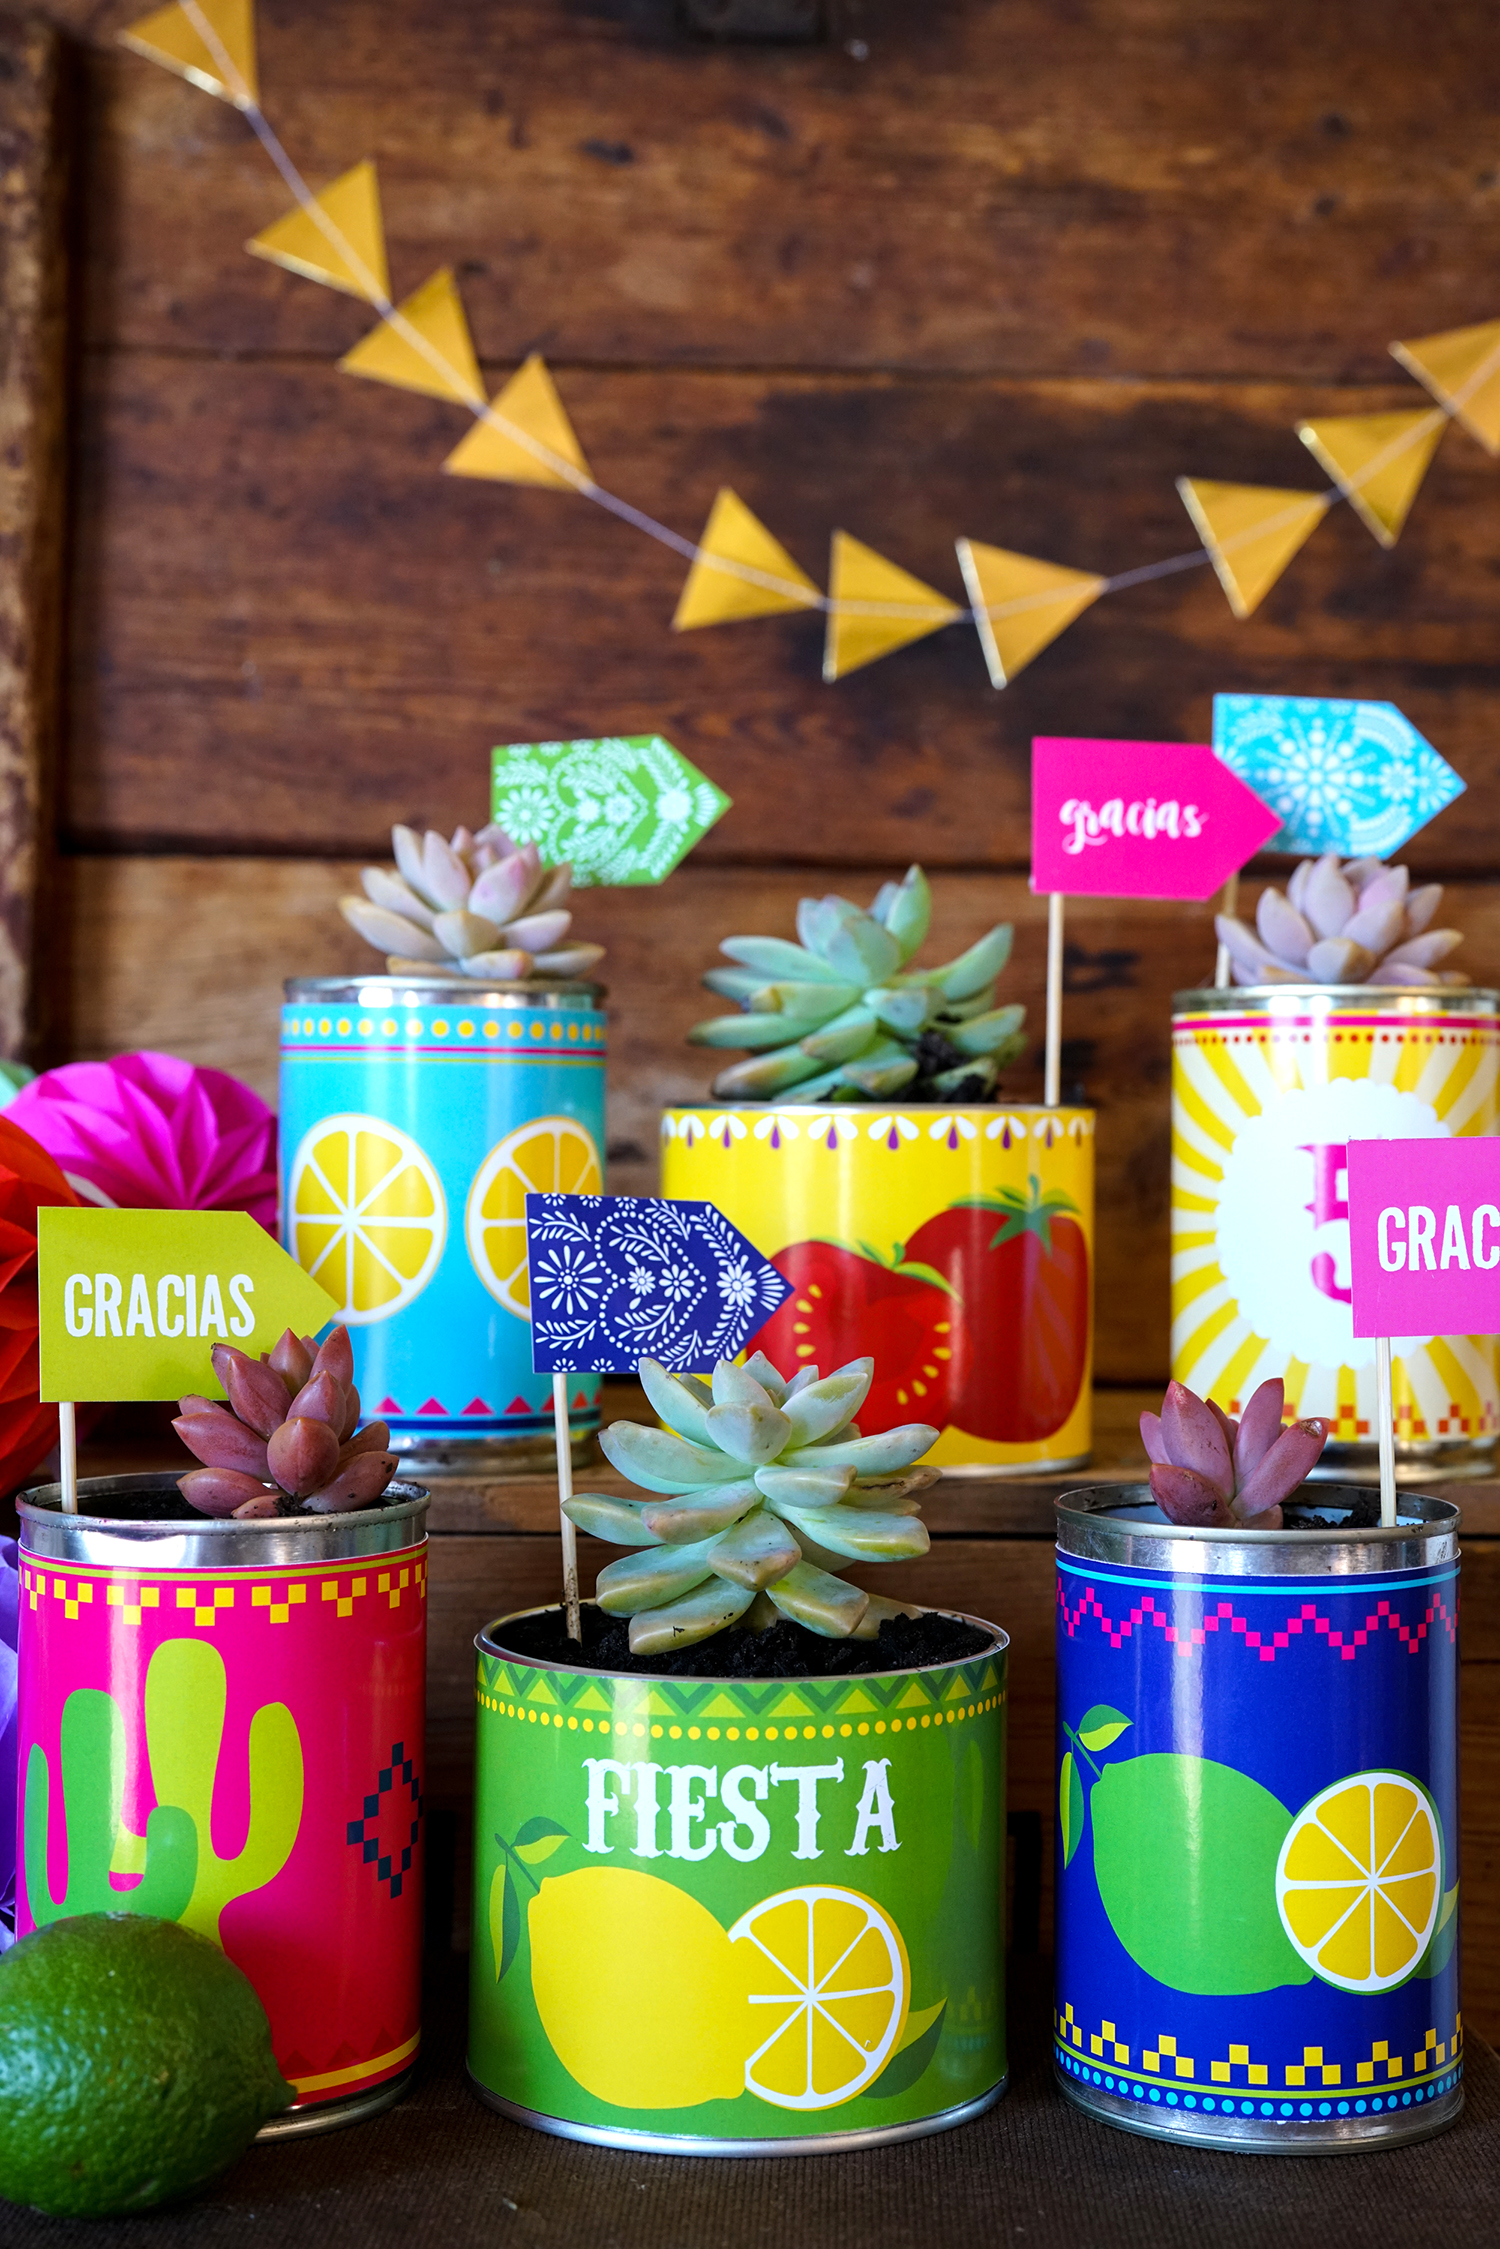 Fiesta Party Favors Tin Can Planters with bright colors and 6 different wrapper designs